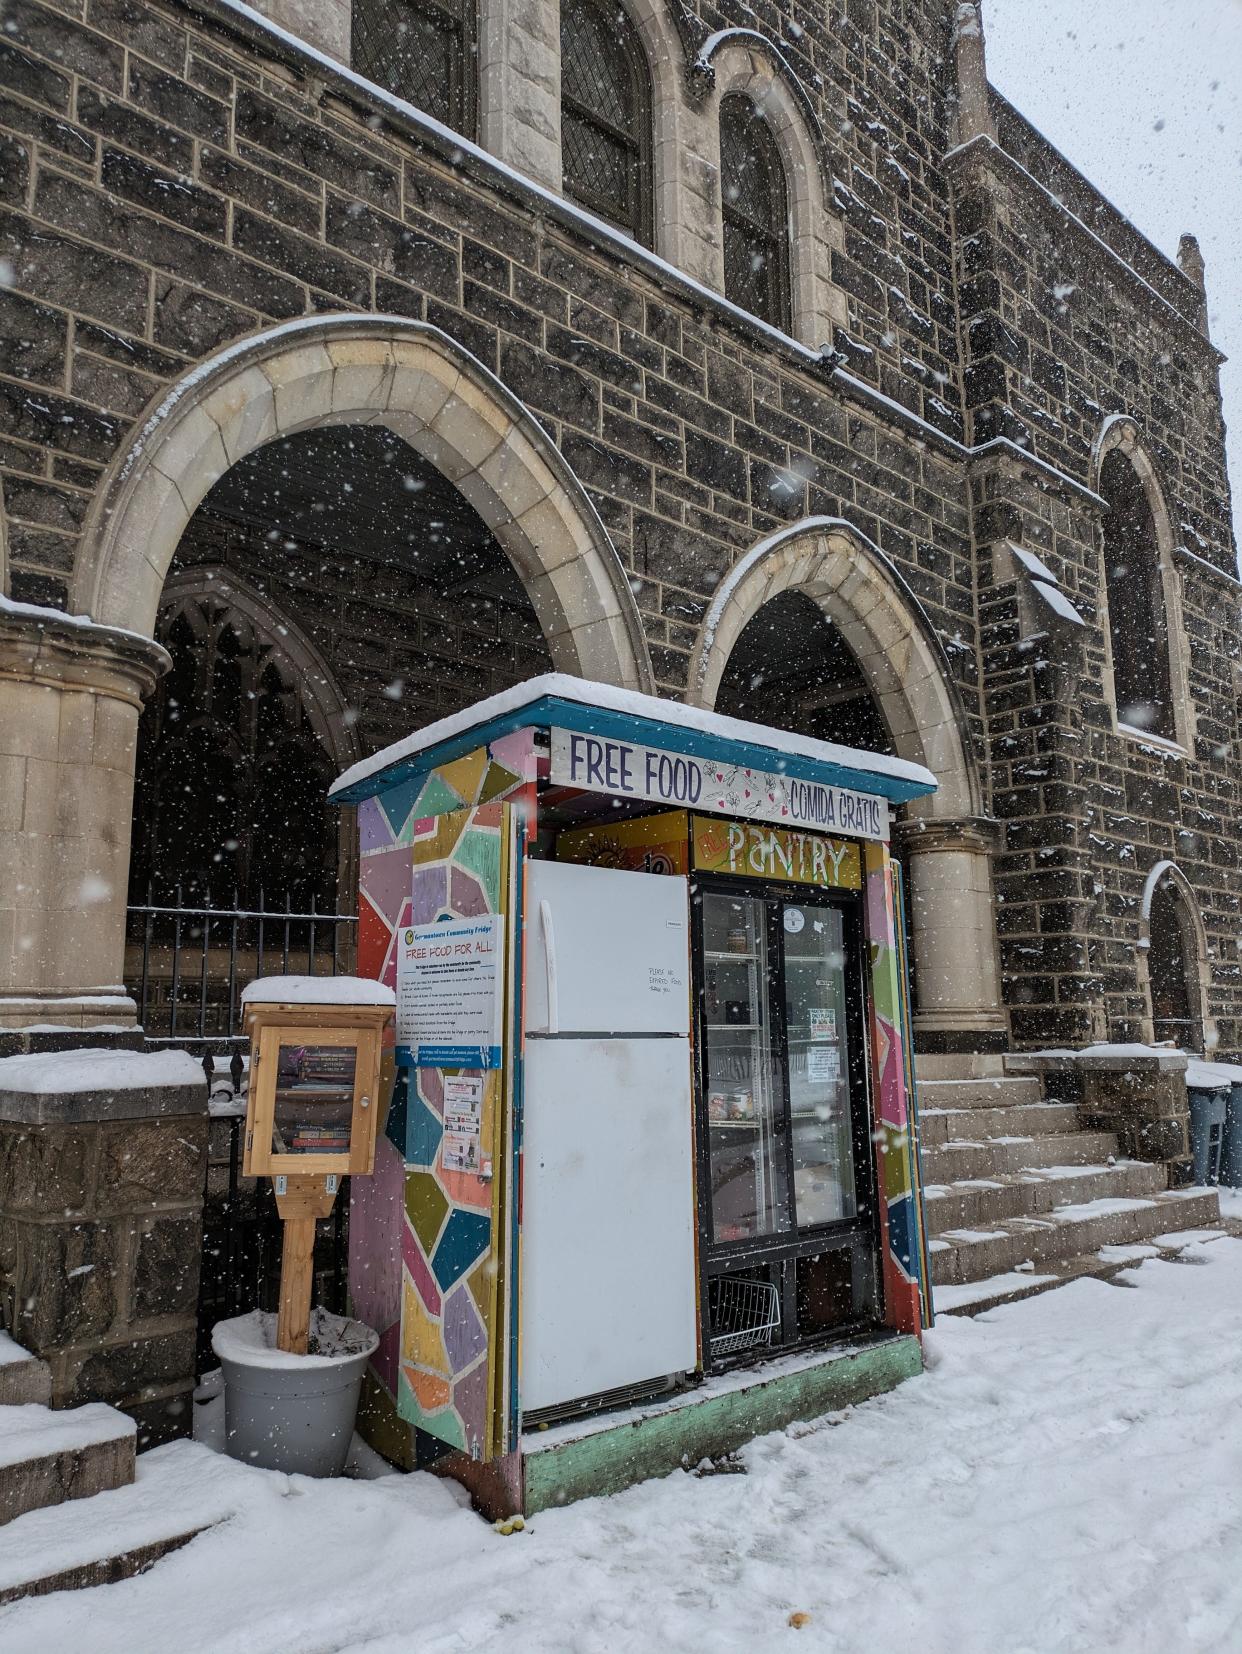 The Germantown Fridge is one of many Philadelphia-area community fridges and began in September 2020 by a Dean at a local middle school. She was in the process of moving and had an extra fridge and decided to put it to good use.